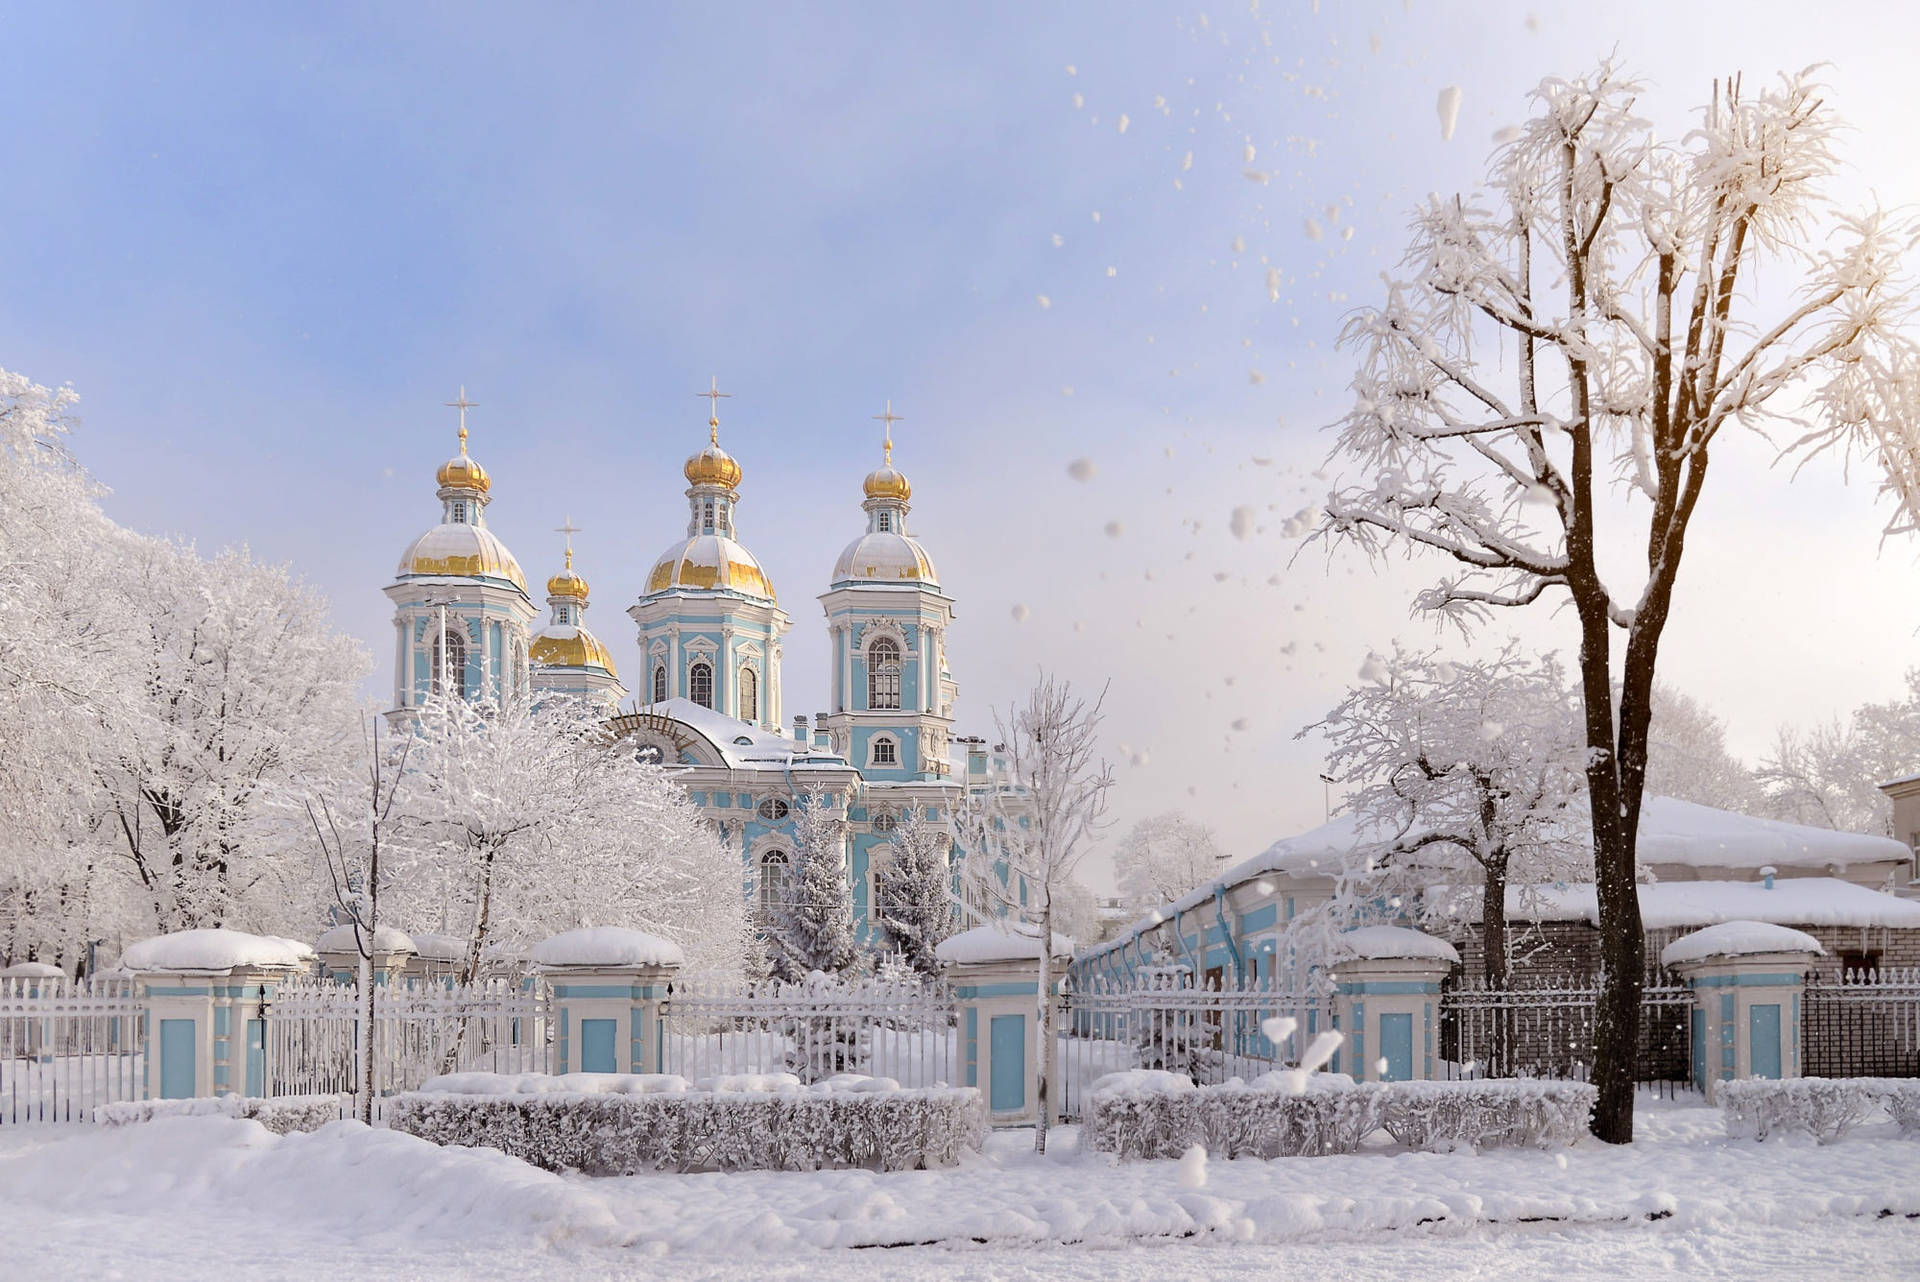 St. Nicholas Naval Cathedral Russia Background